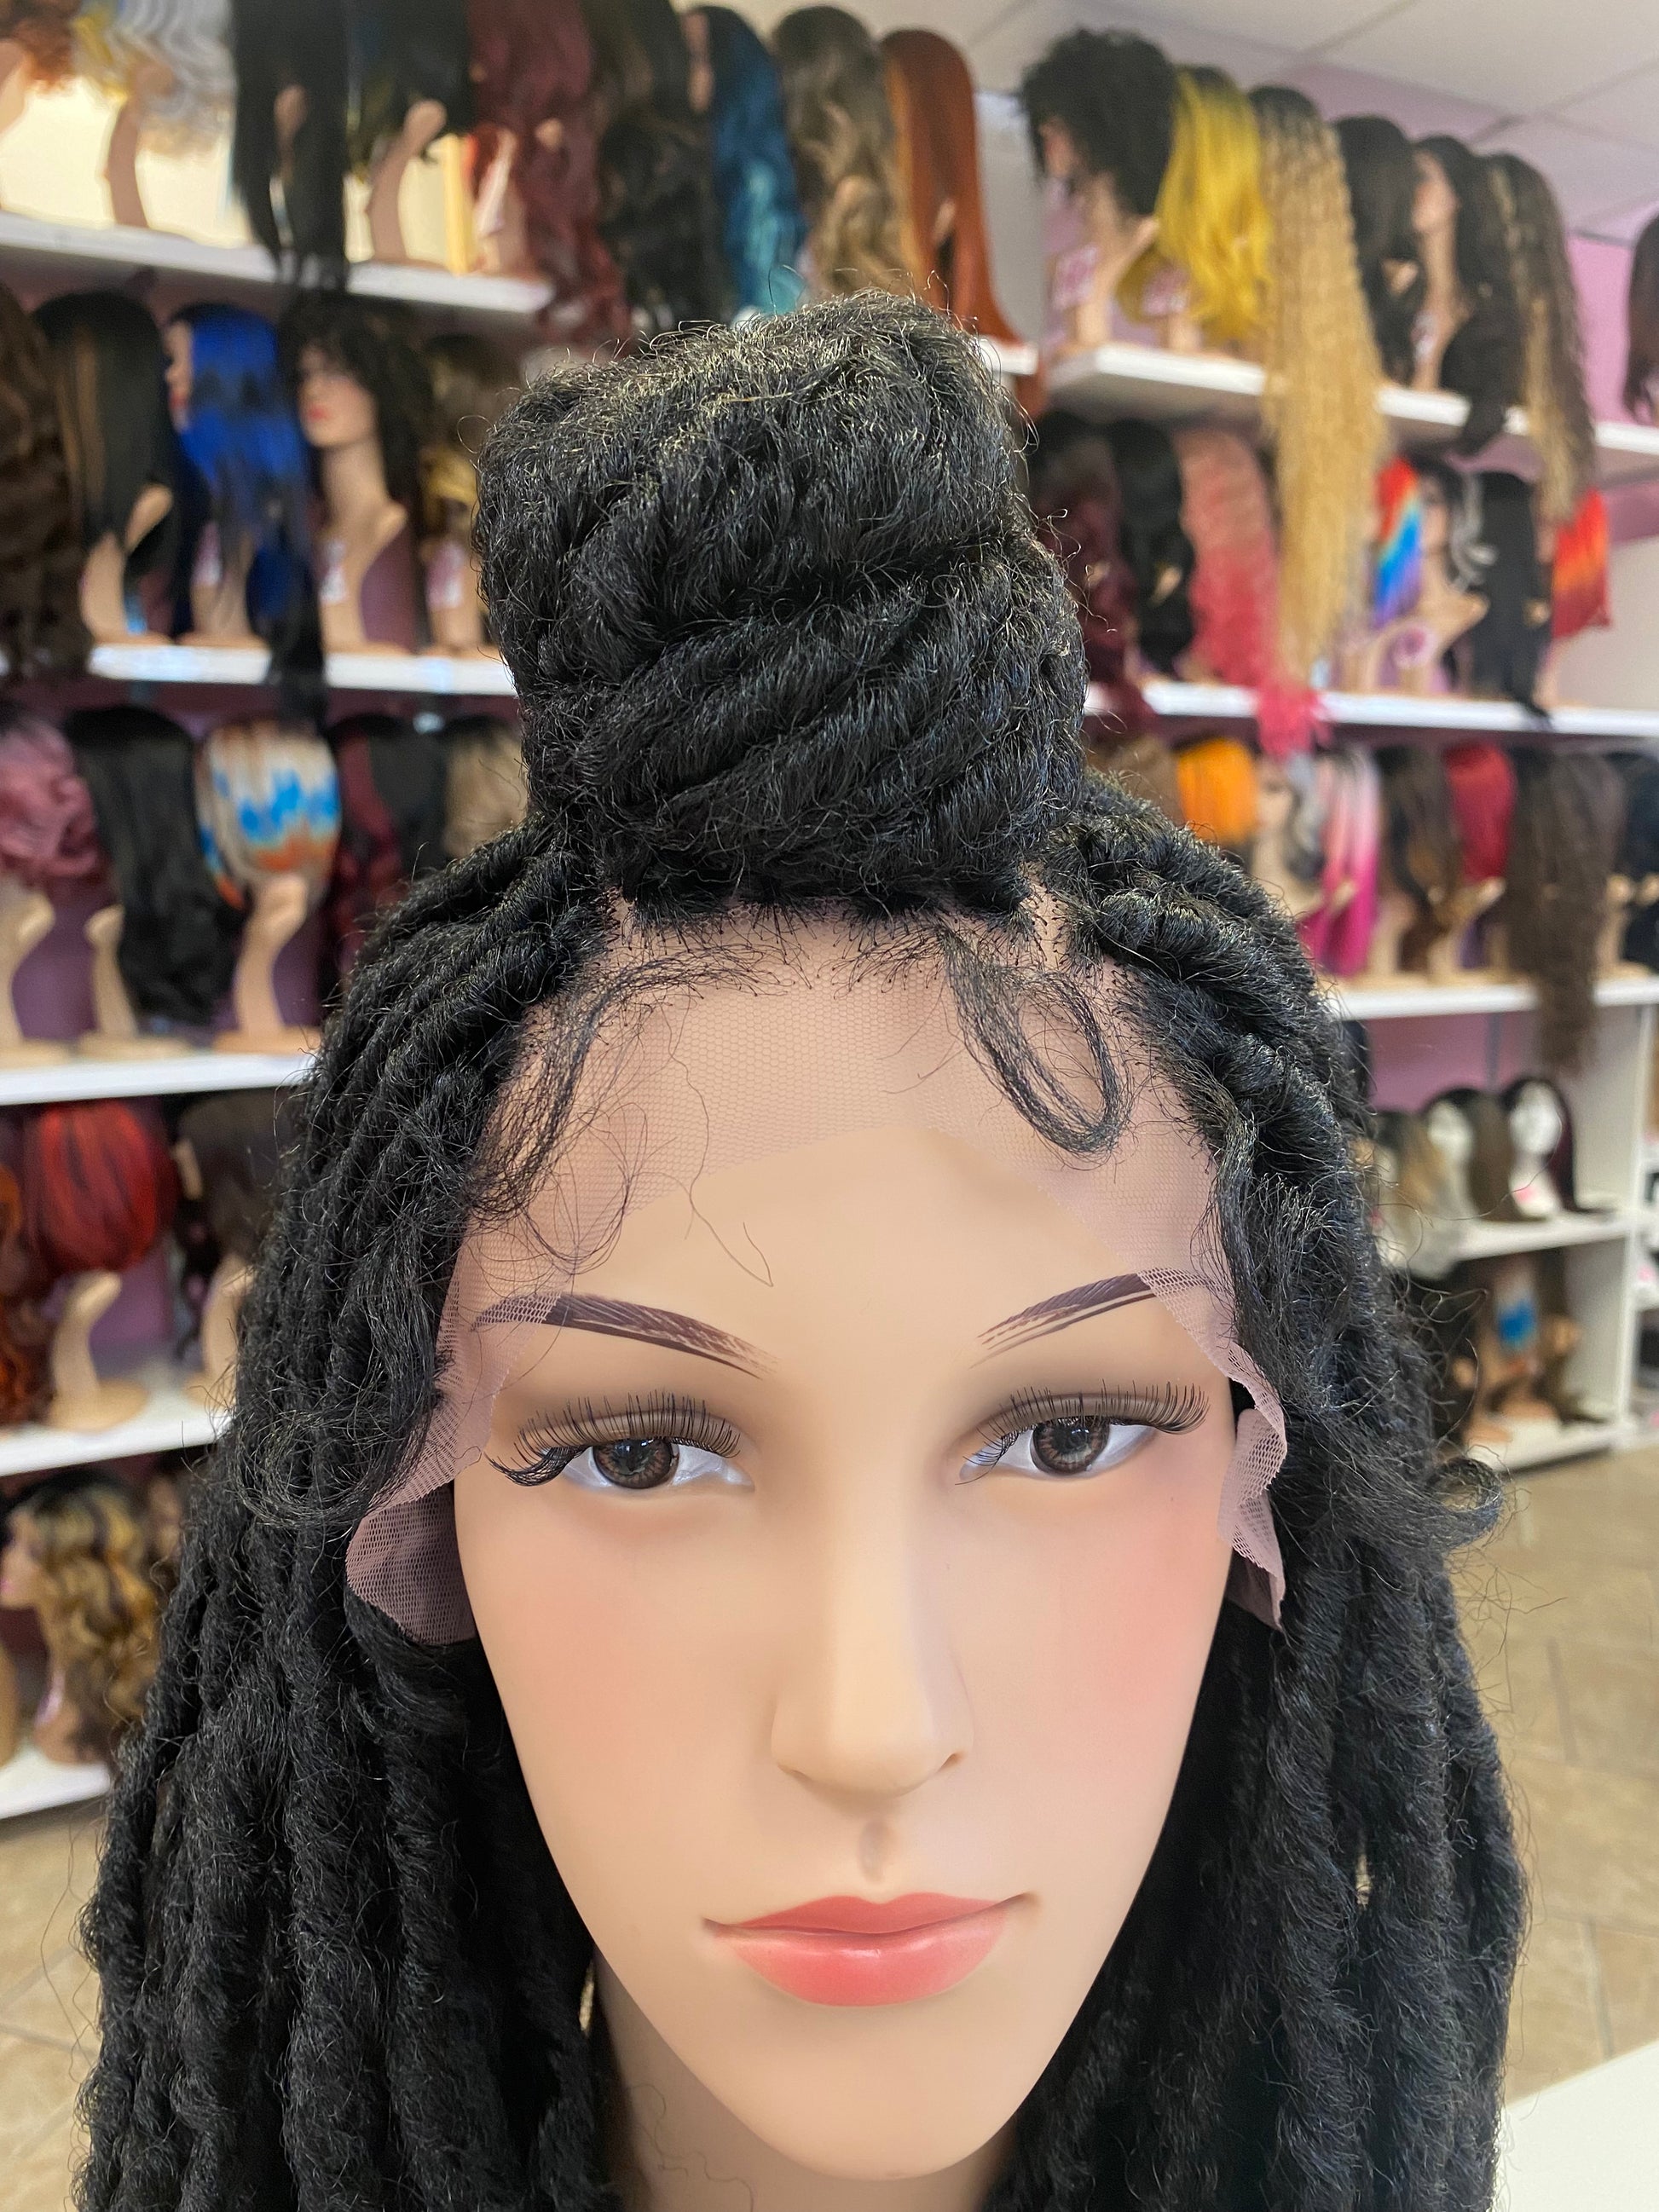 100 Ava - 4x4 Free Part Lace Front Wig - 1B - DaizyKat Cosmetics 100 Ava - 4x4 Free Part Lace Front Wig - 1B DaizyKat Cosmetics Wigs